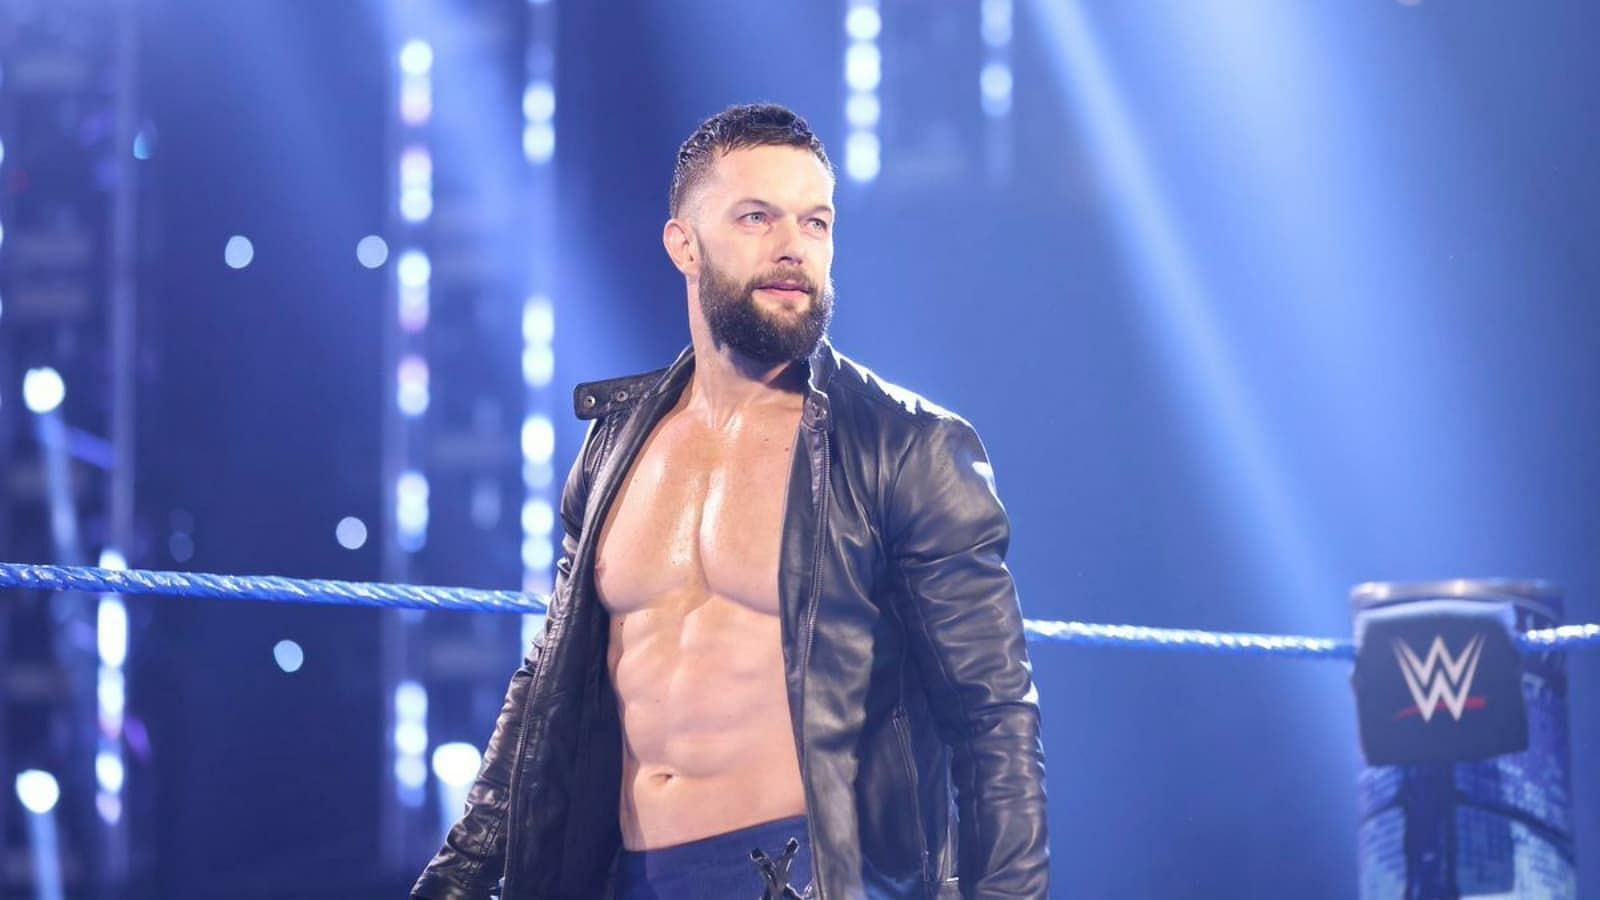 Balor has been back and forth between NXT and the main roster over the last two years